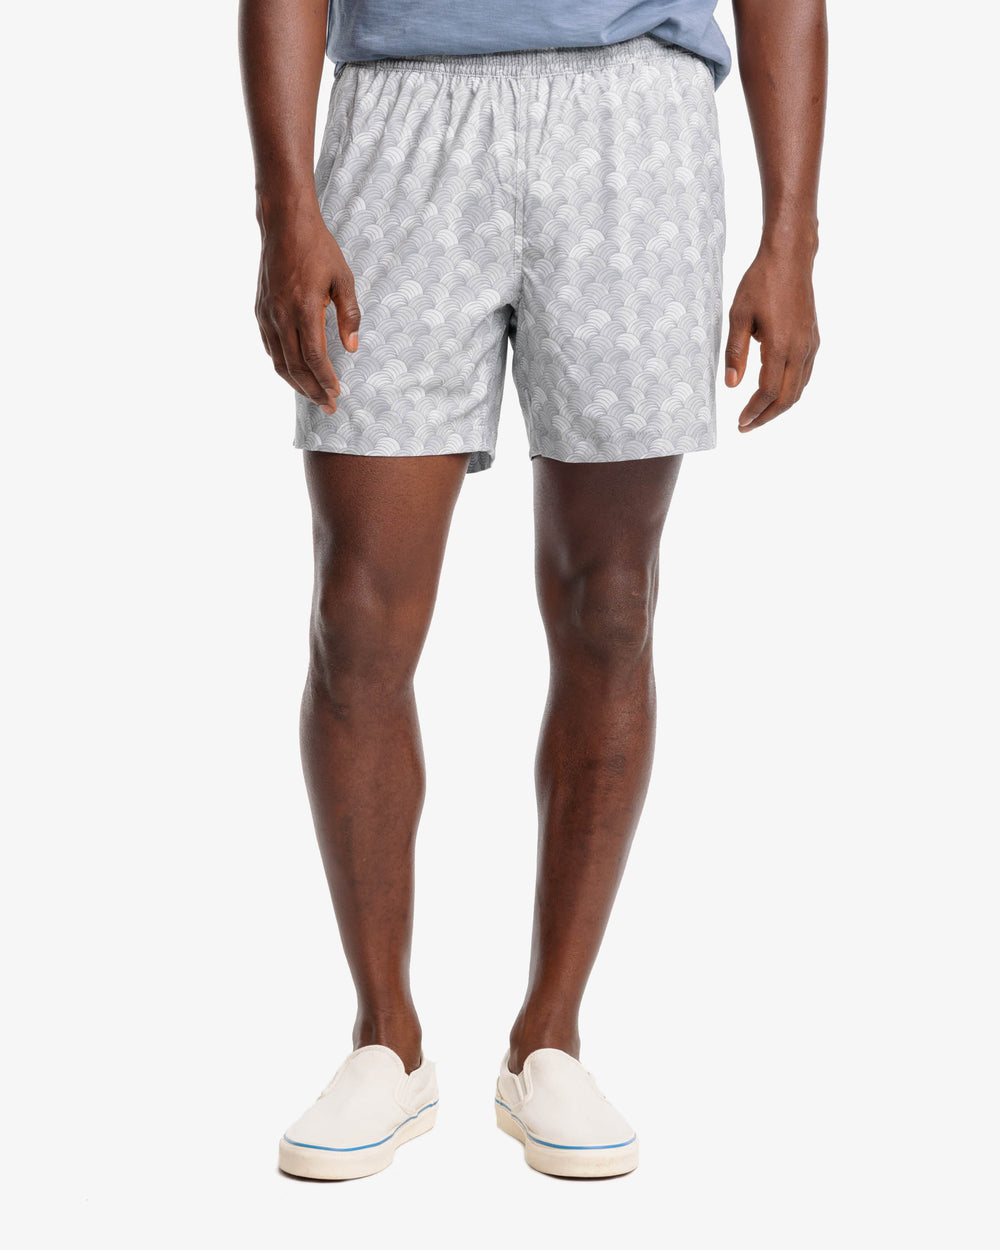 The front view of the Southern Tide Rip Channel Monterrey Short by Southern Tide - Steel Grey